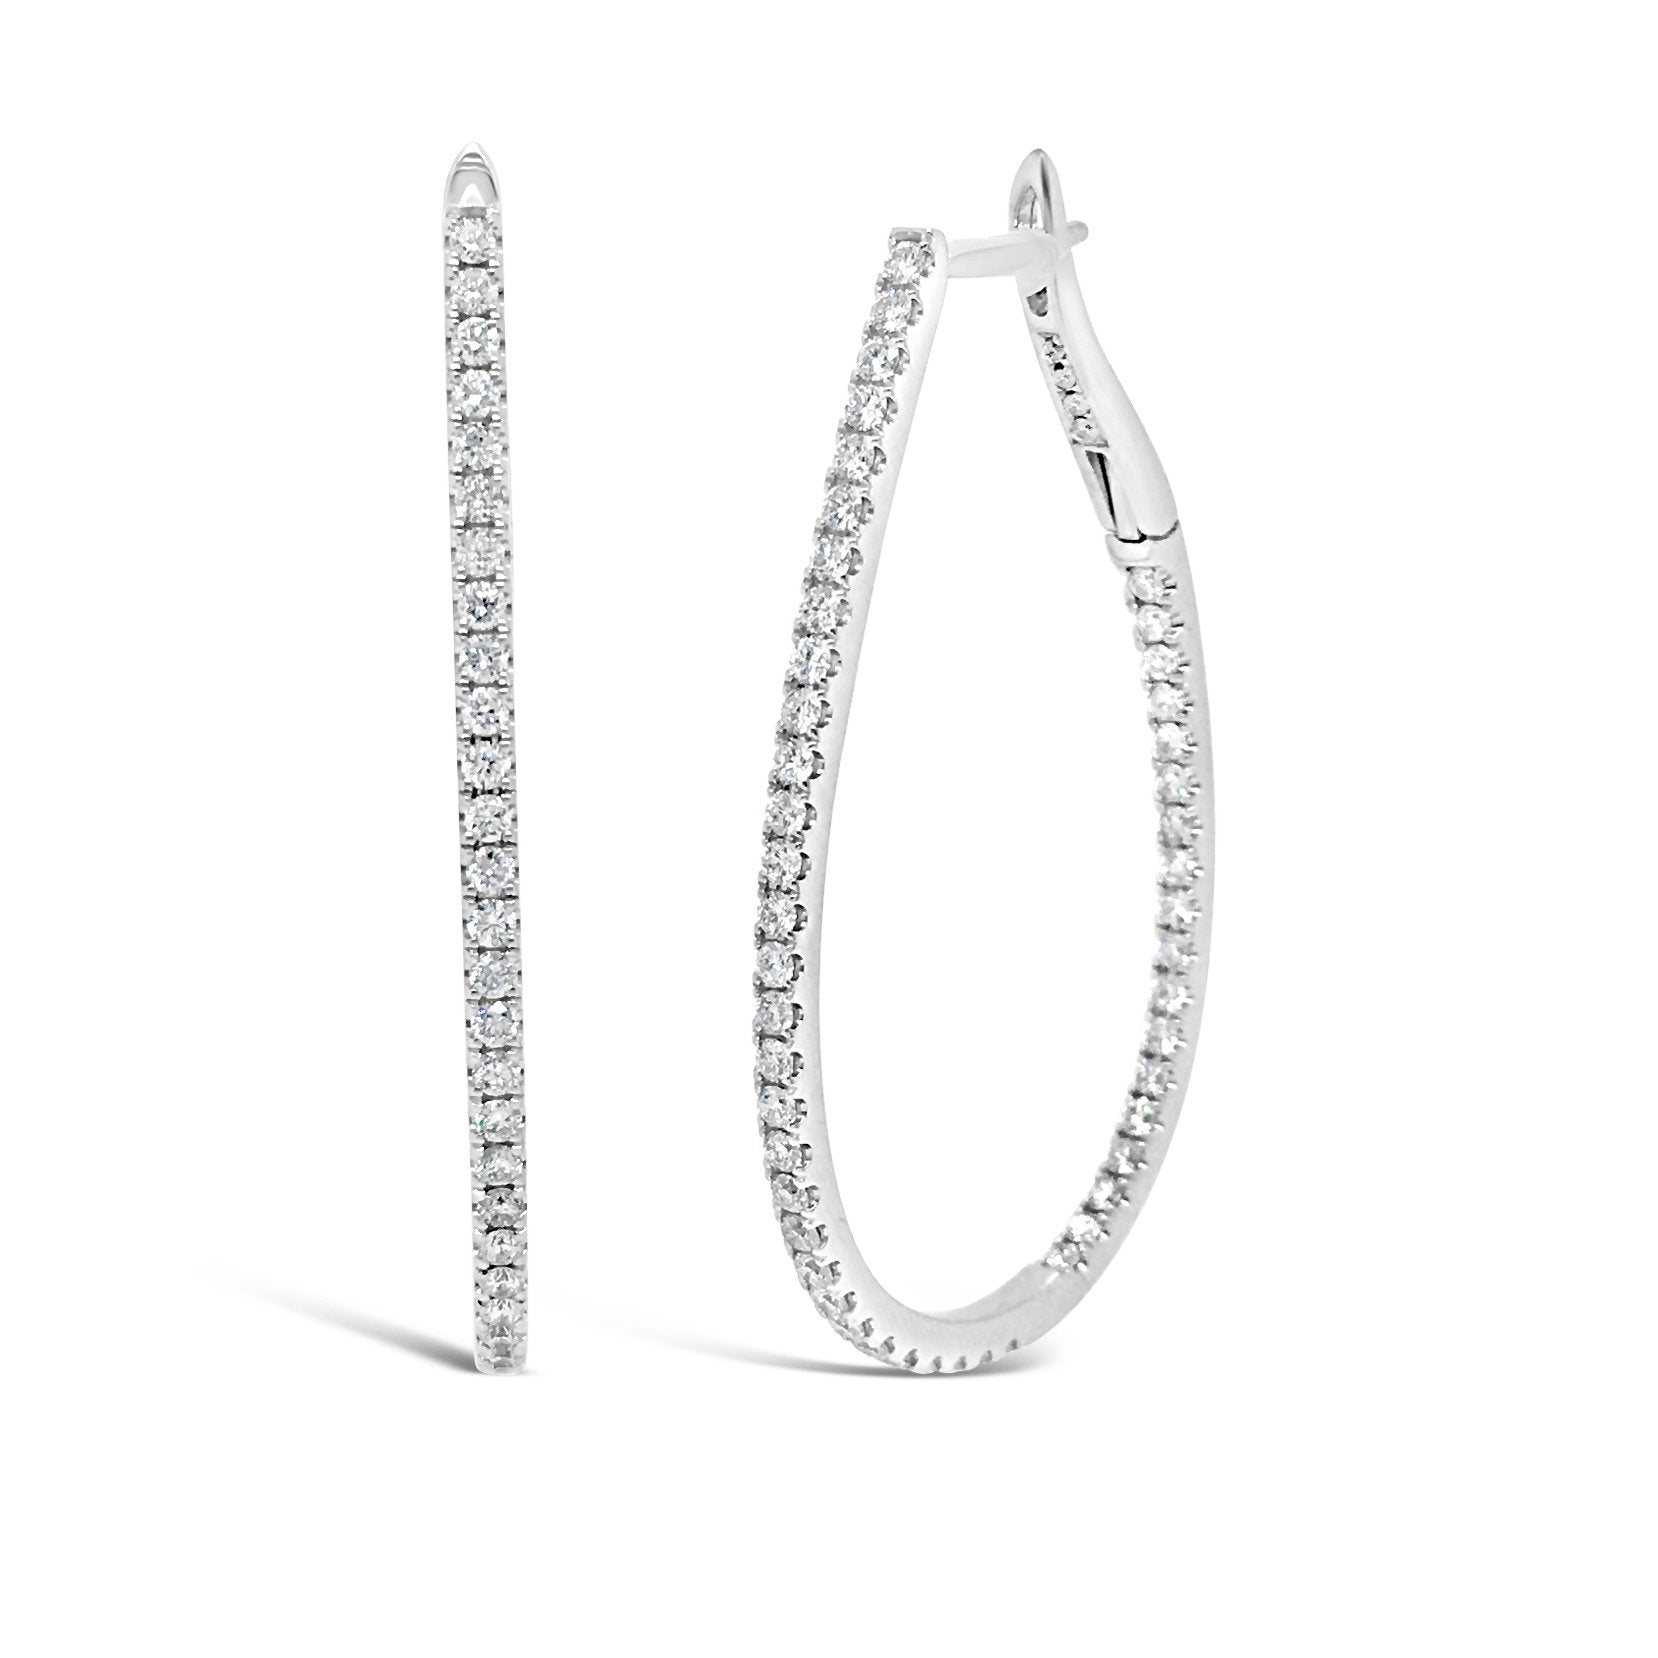 Oval Inside/Out Diamond  Hoop Earrings -18k white gold weighing 8.73 grams -104 round diamonds weighing 1.58 carats